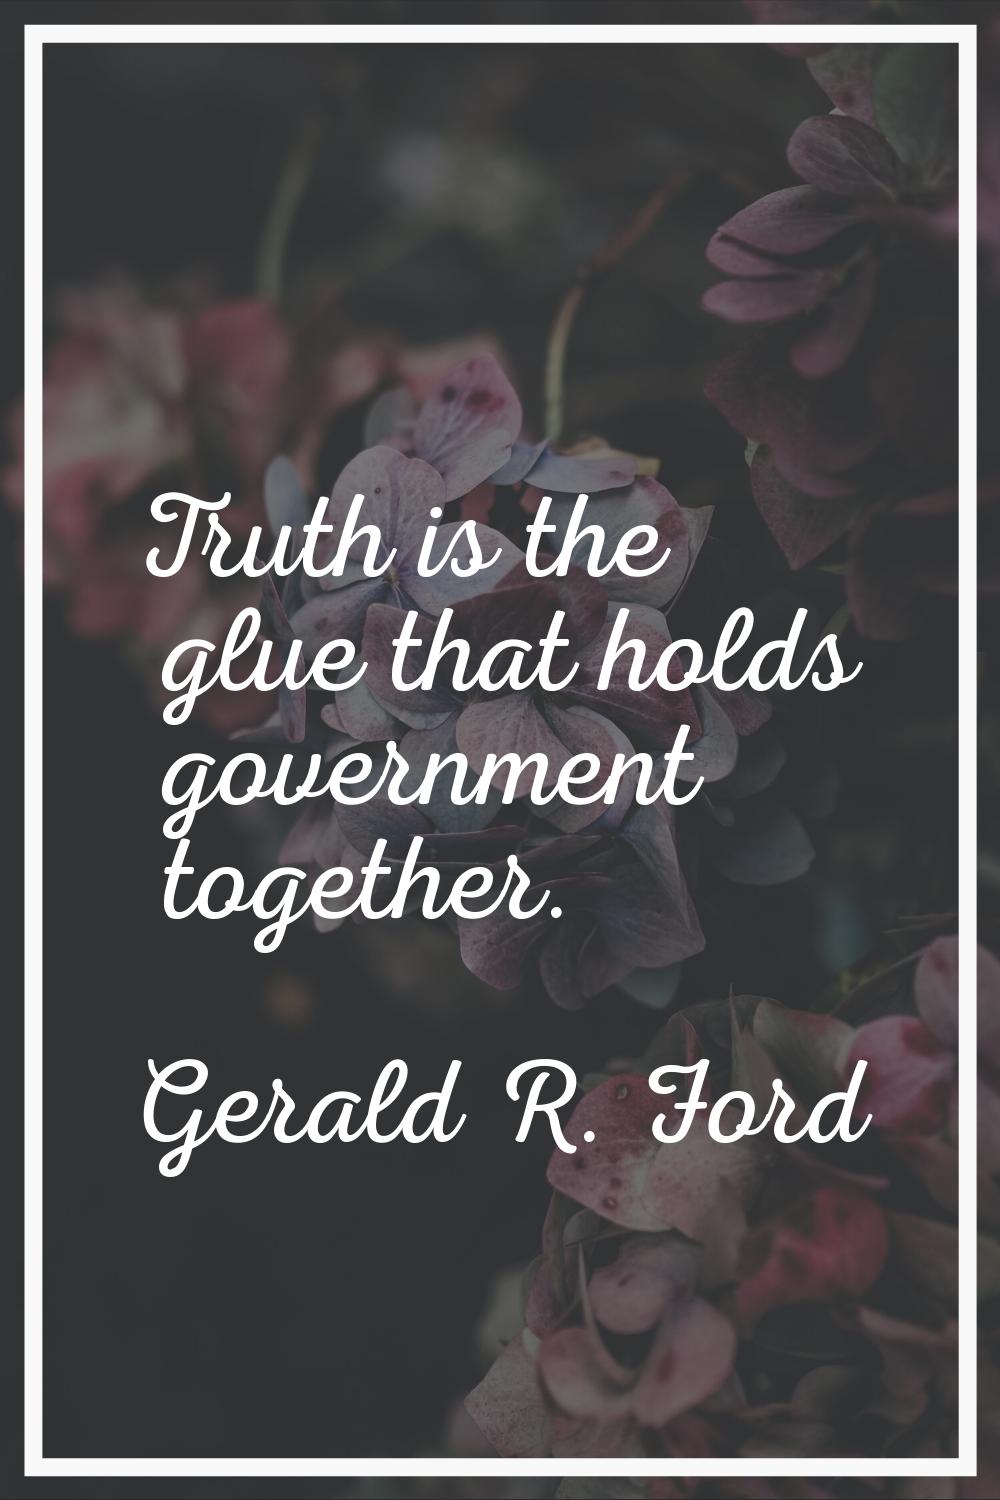 Truth is the glue that holds government together.